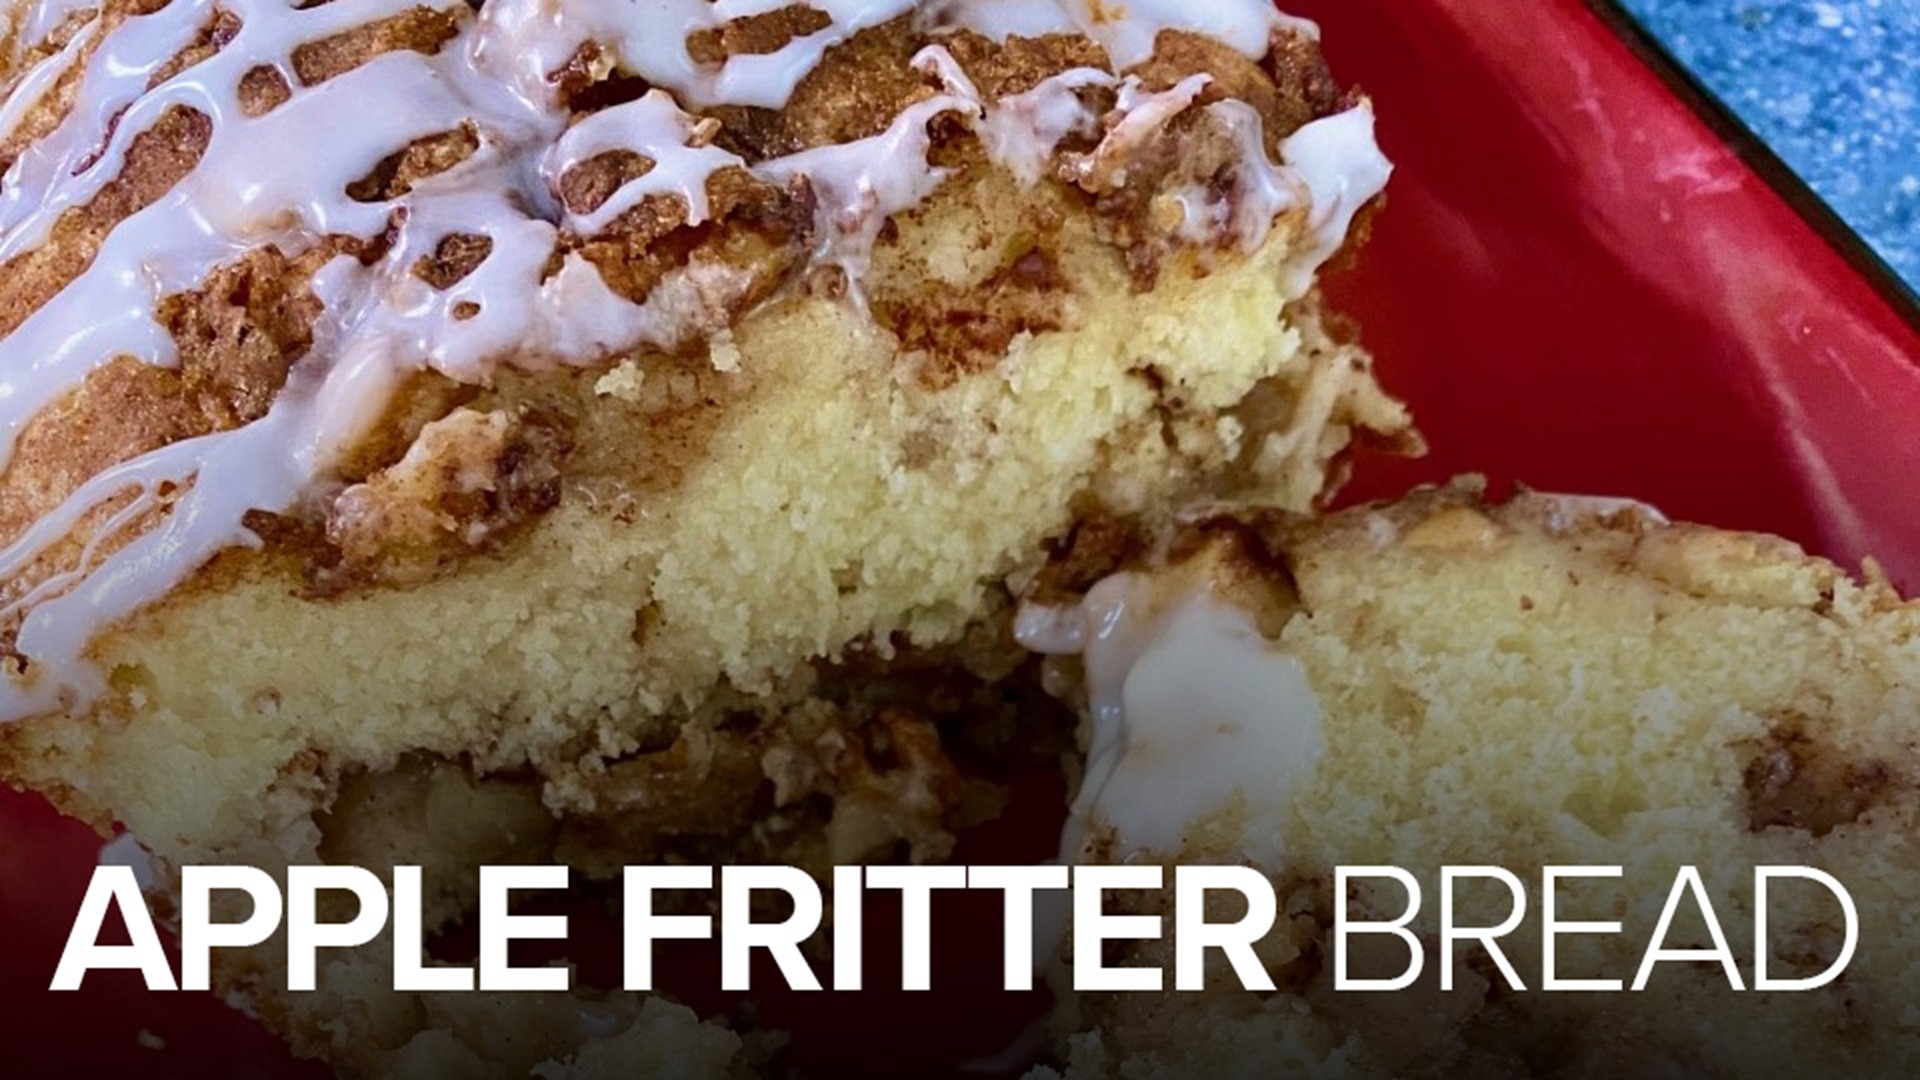 You've probably made banana bread before, but what about Apple Fritter Bread? It's simple, delicious and might just be your new favorite sweet treat!